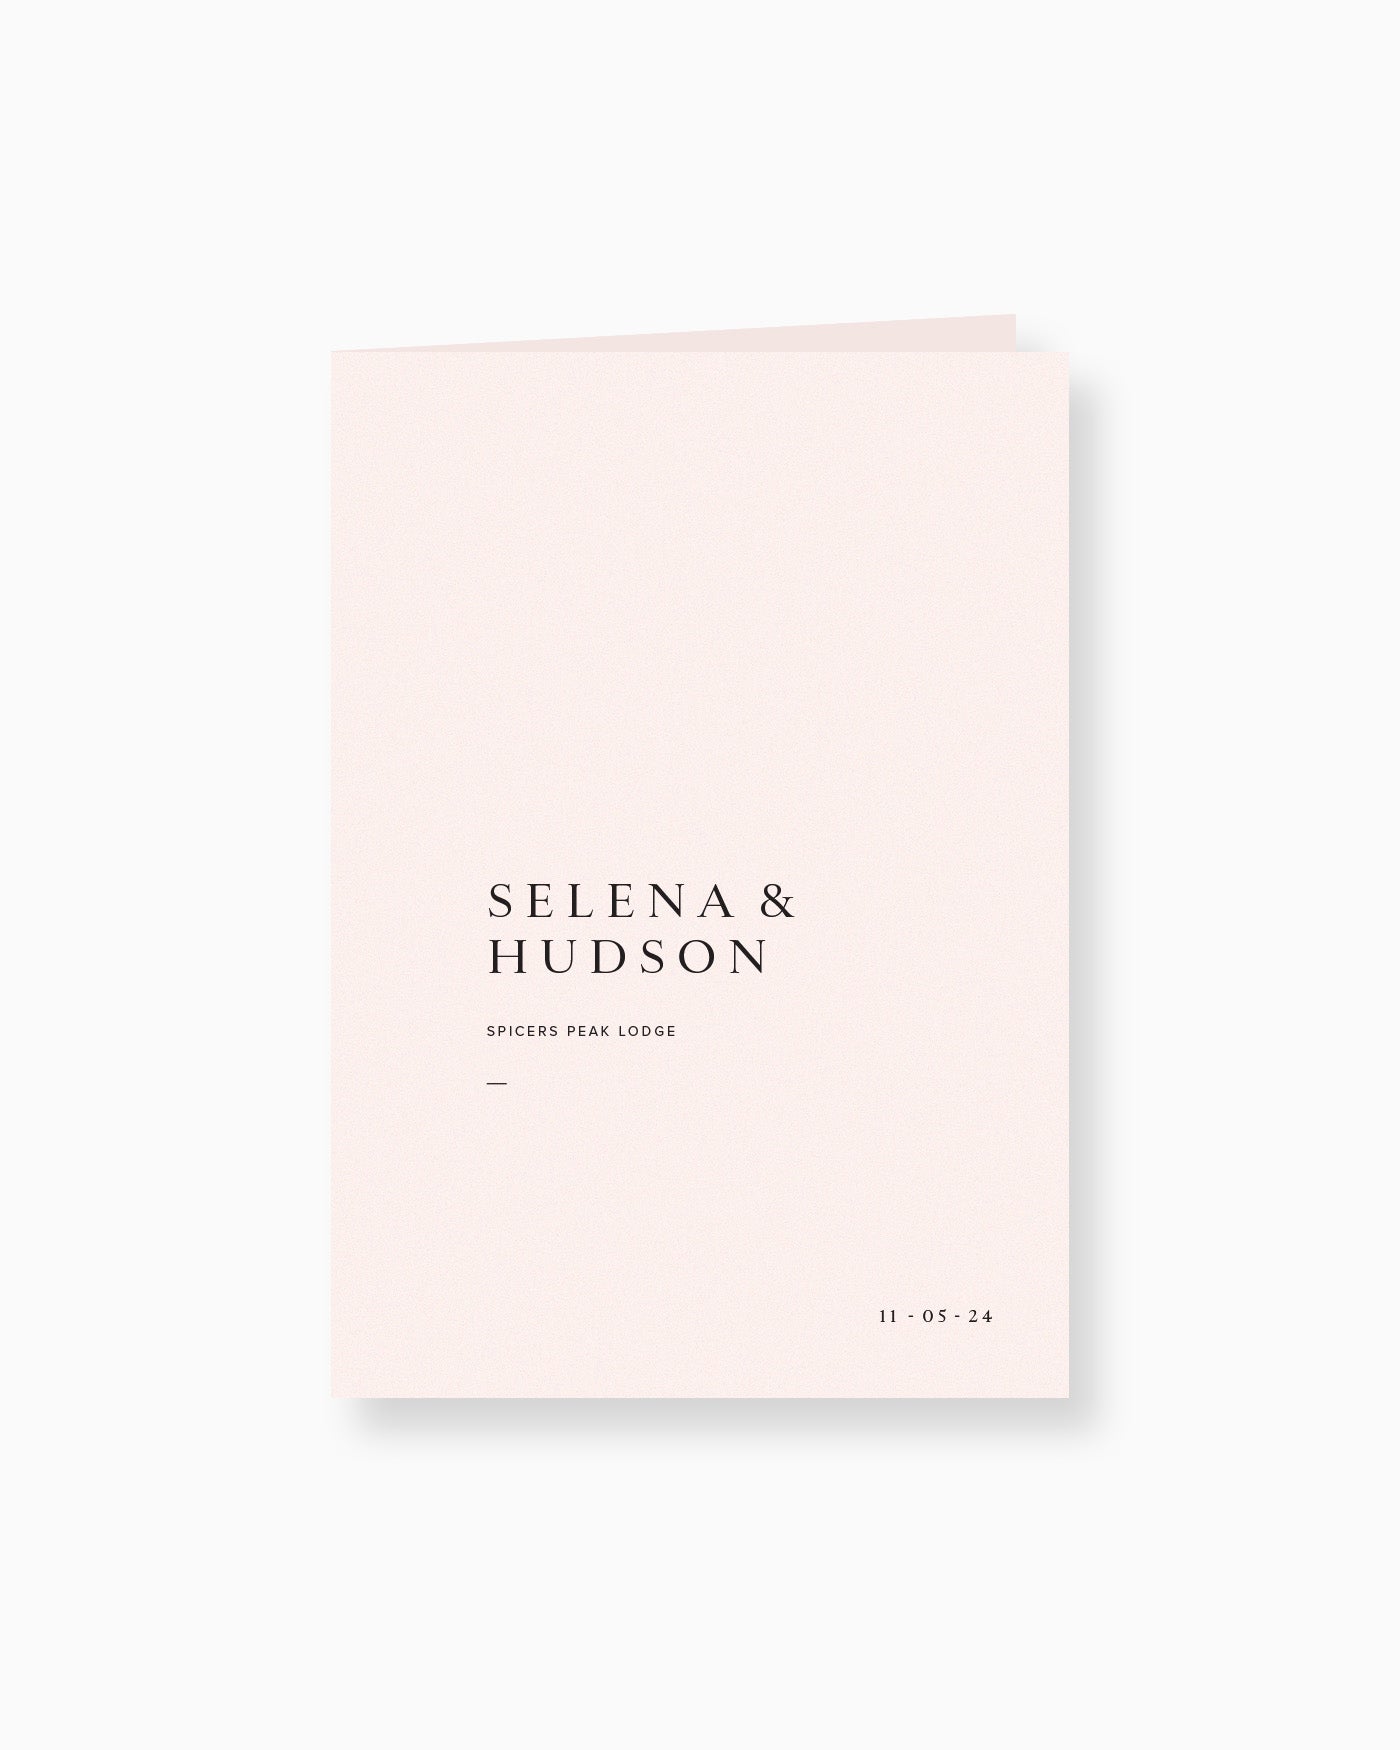 Peppermint Press On the Day Selena Ceremony Booklet